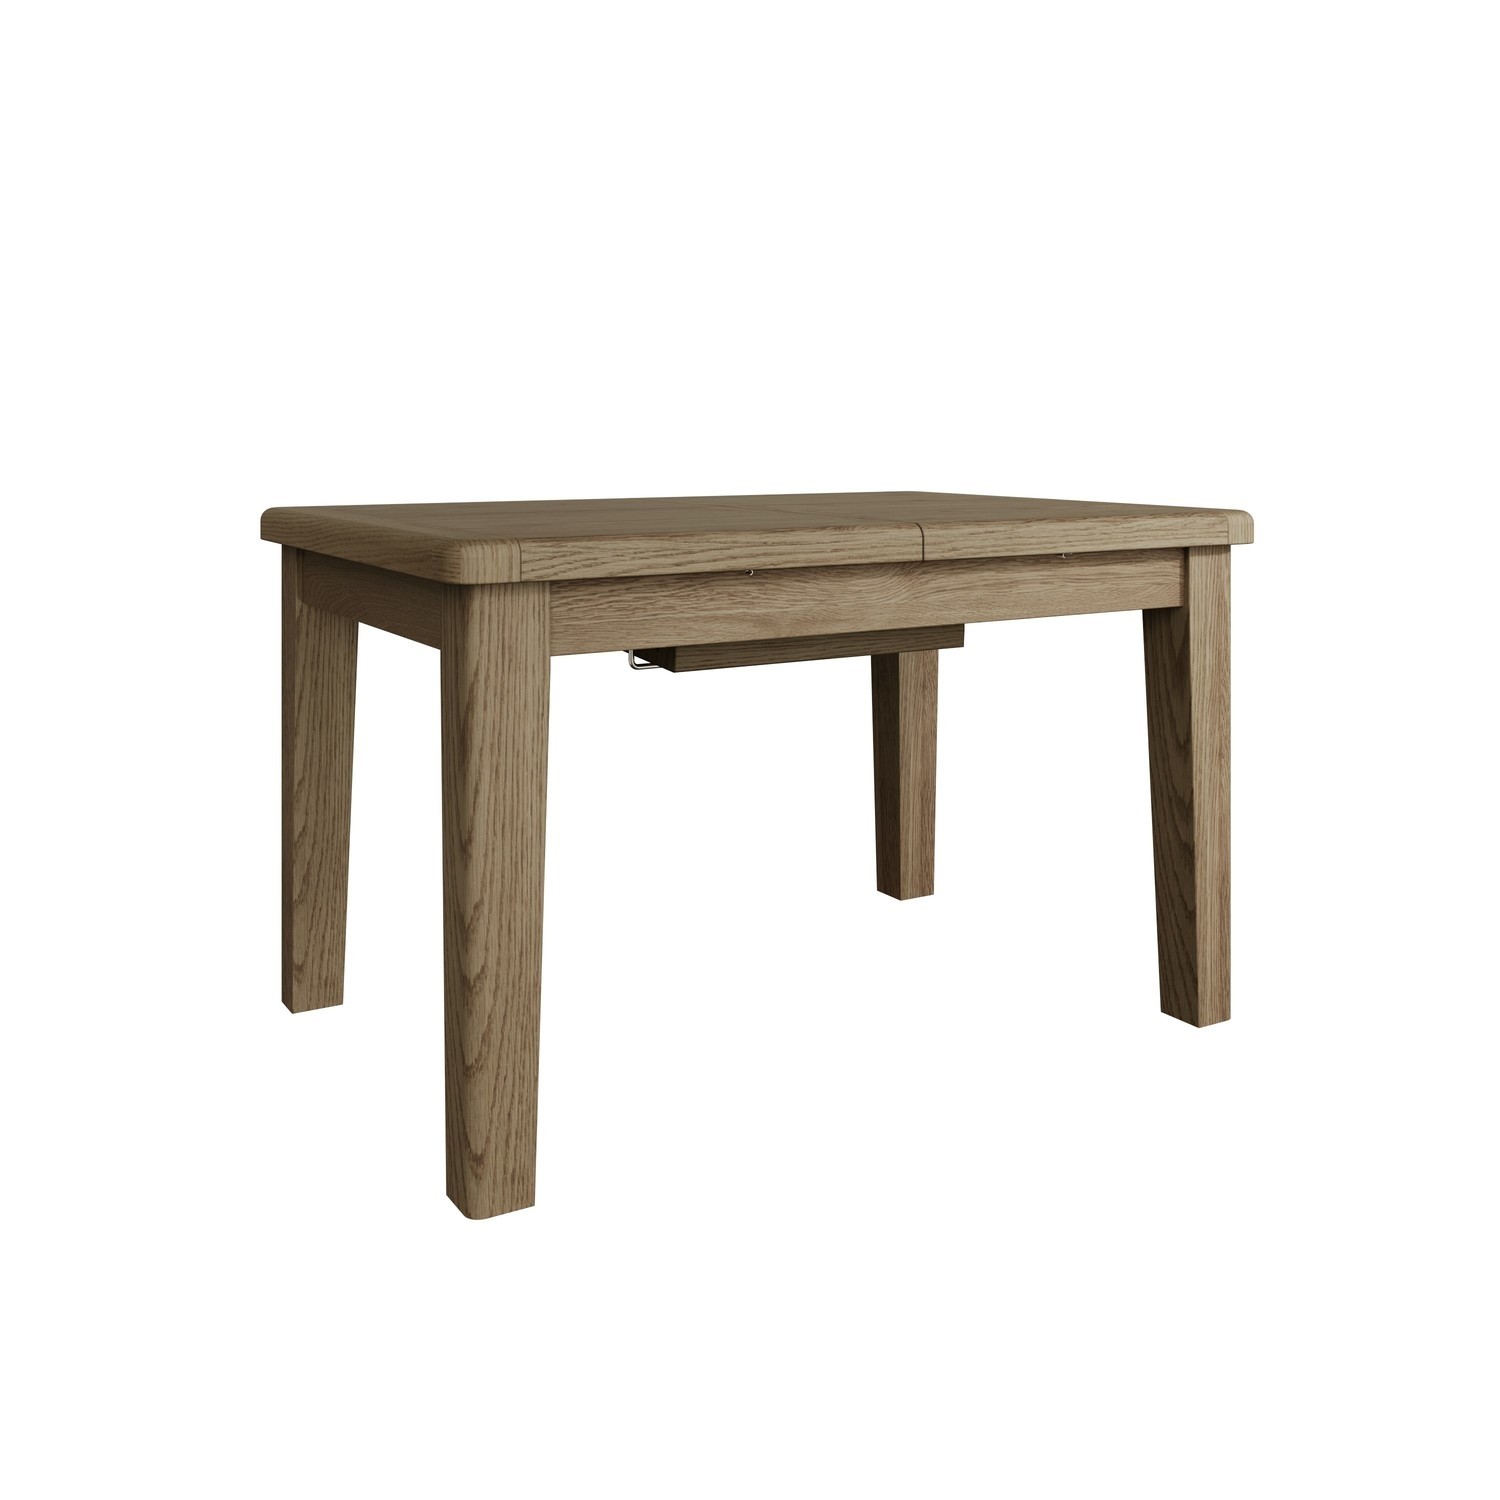 Read more about Oak extendable dining table